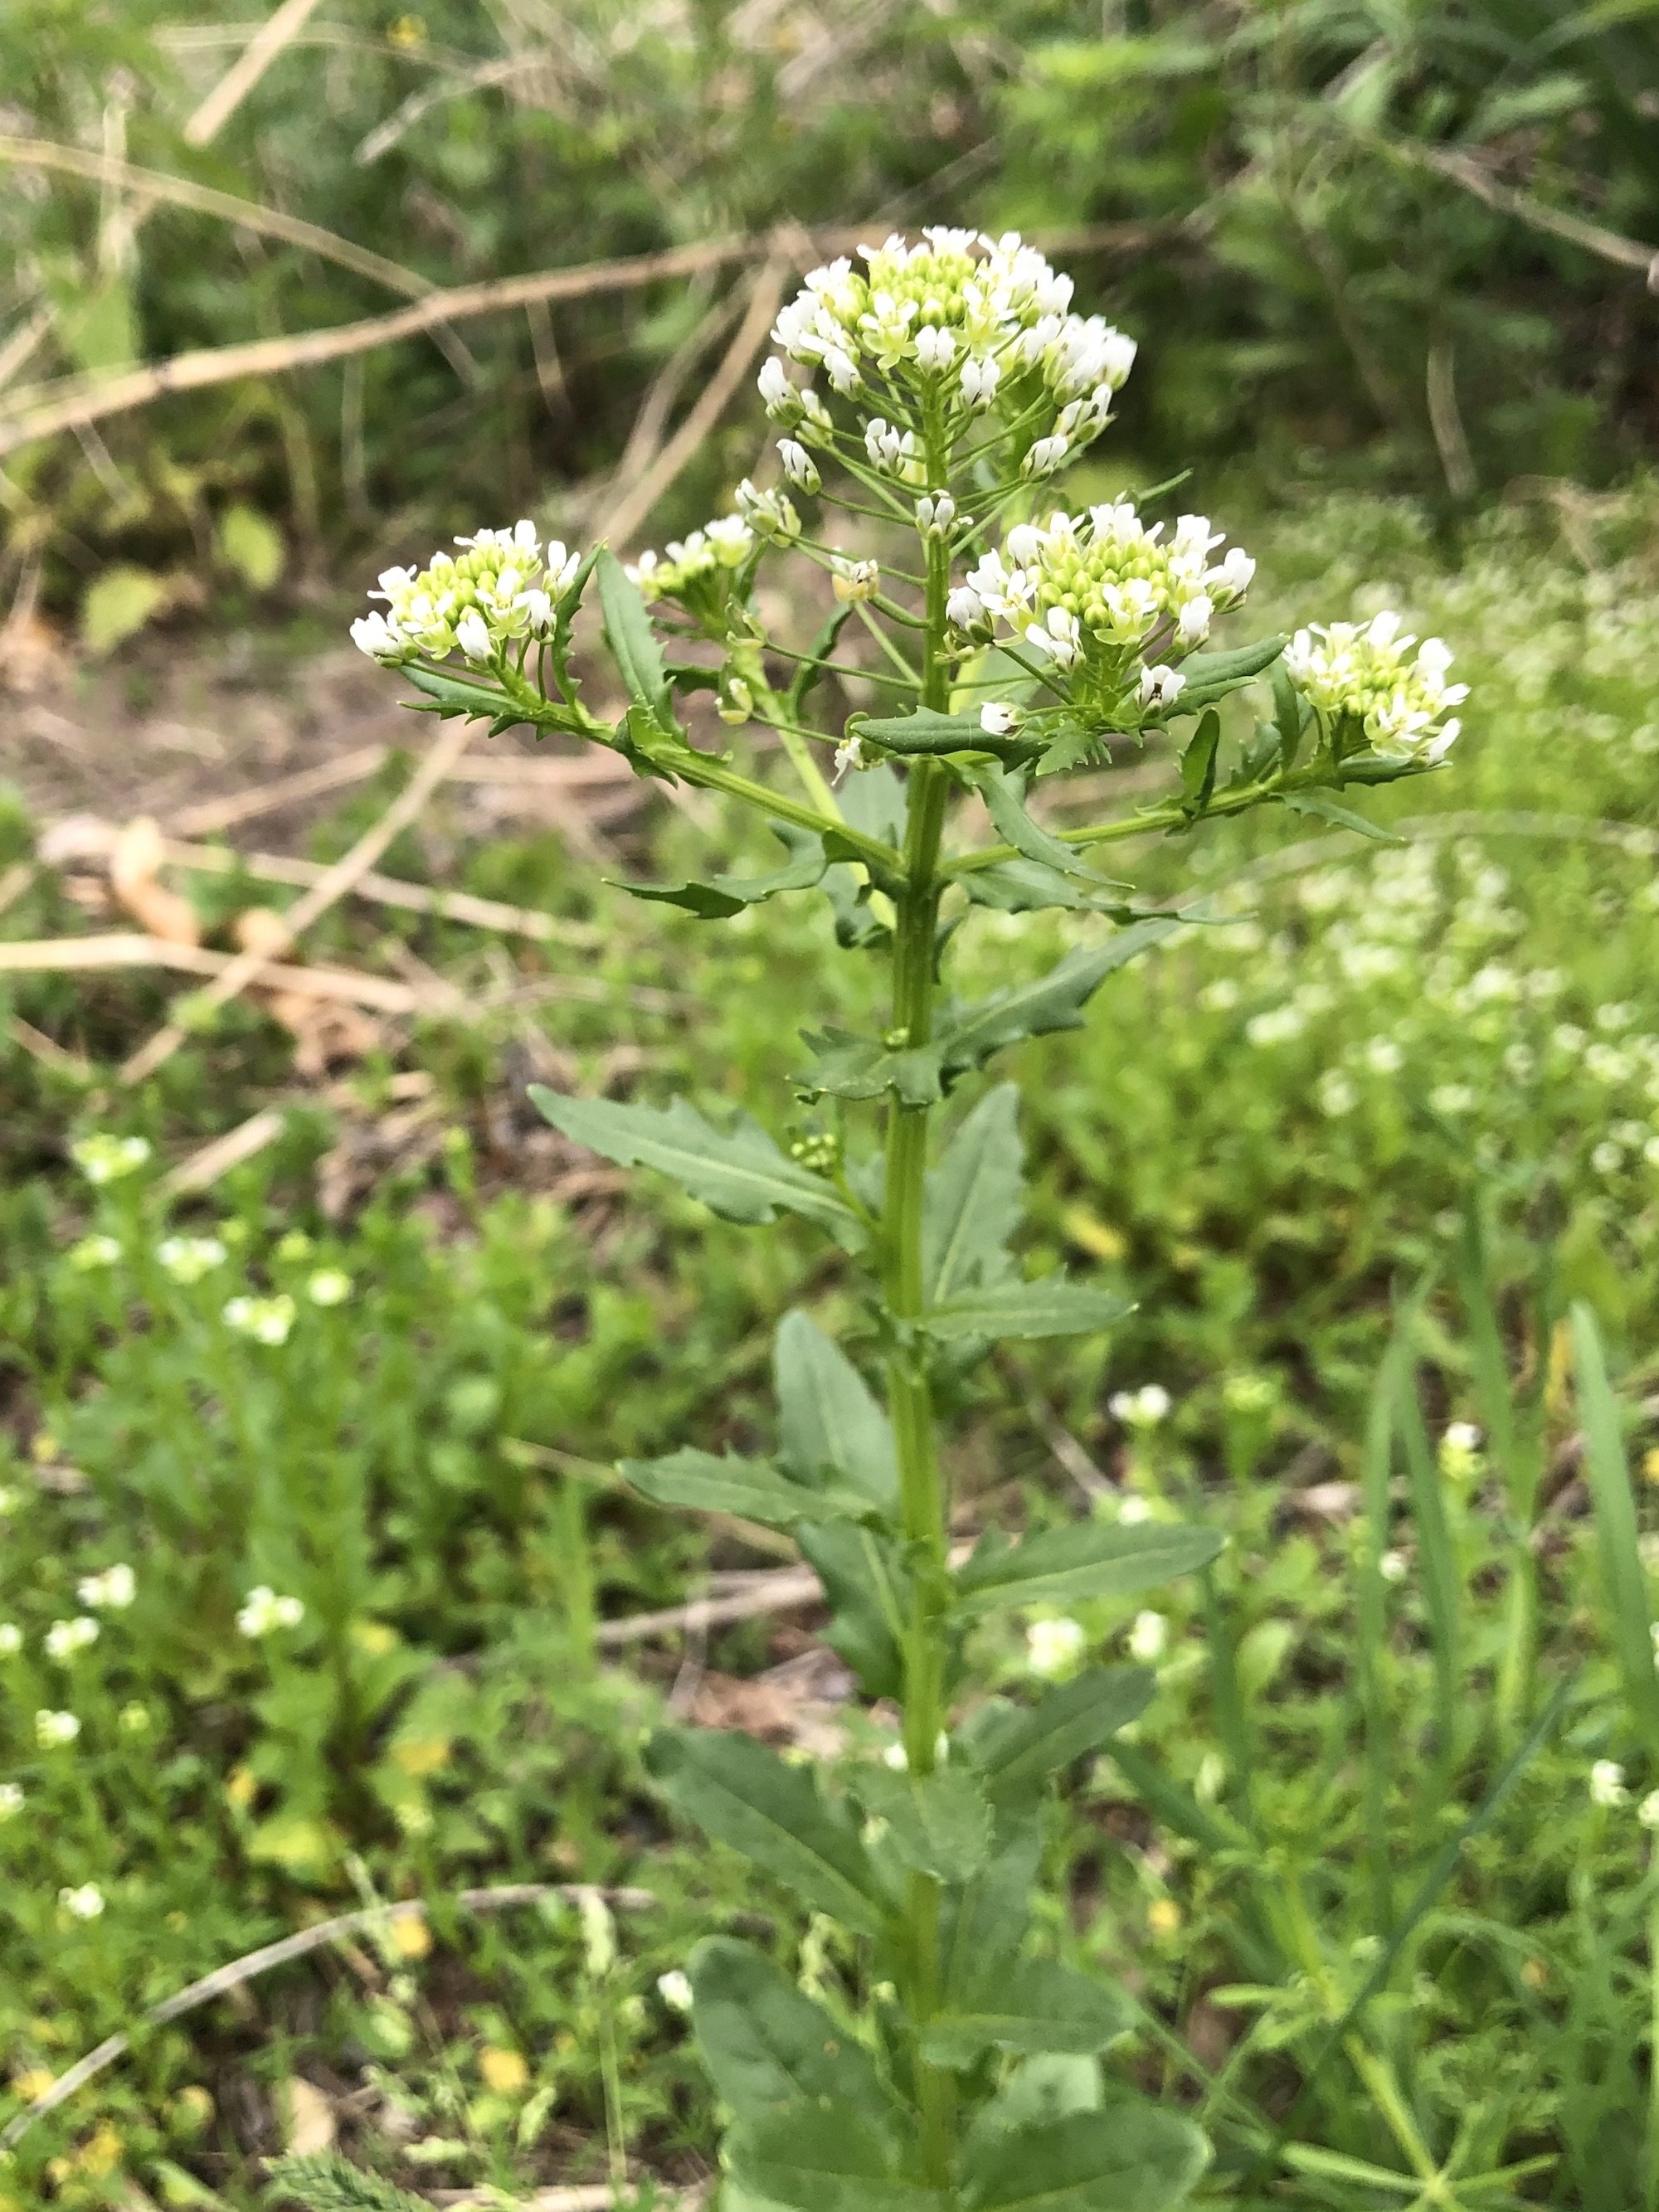 Field Pennycress leaves near retaining pond on corner of Manitou Way and Nakoma Road in Madison, Wisconsin on May 17, 2022.